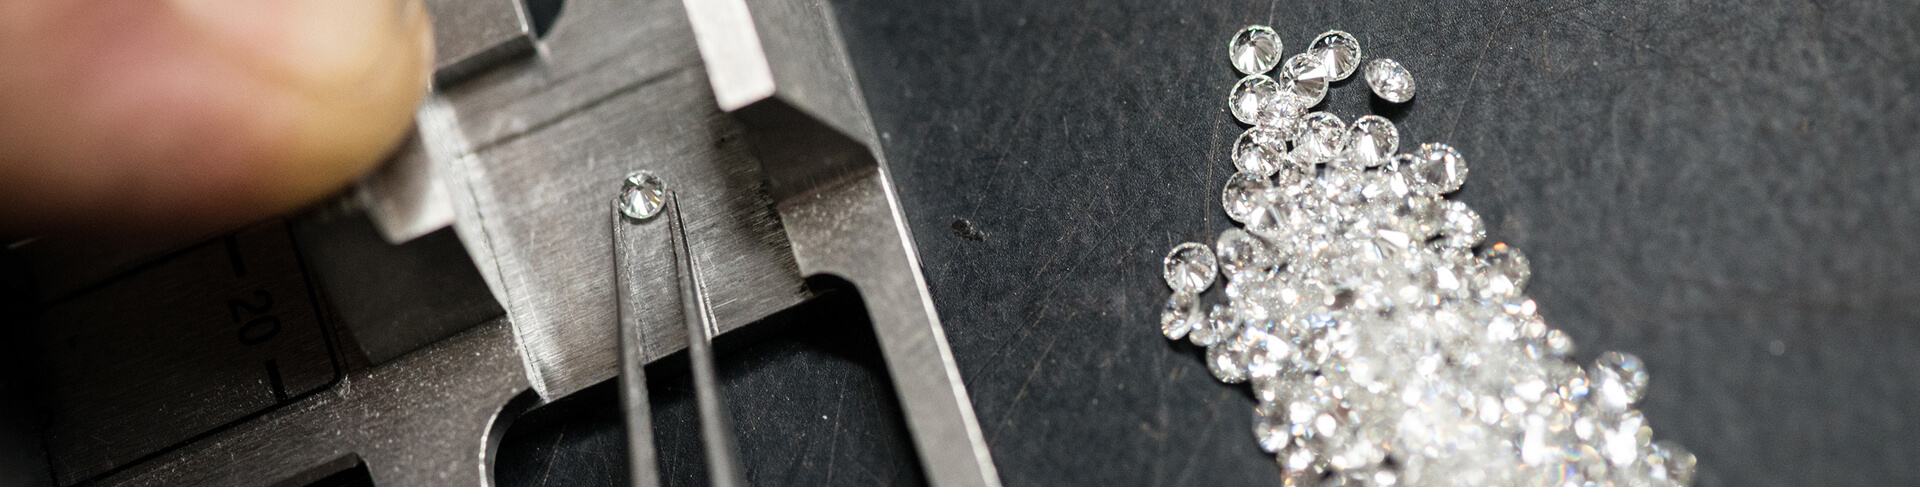 Ethical Canadian Diamonds Being Sorted